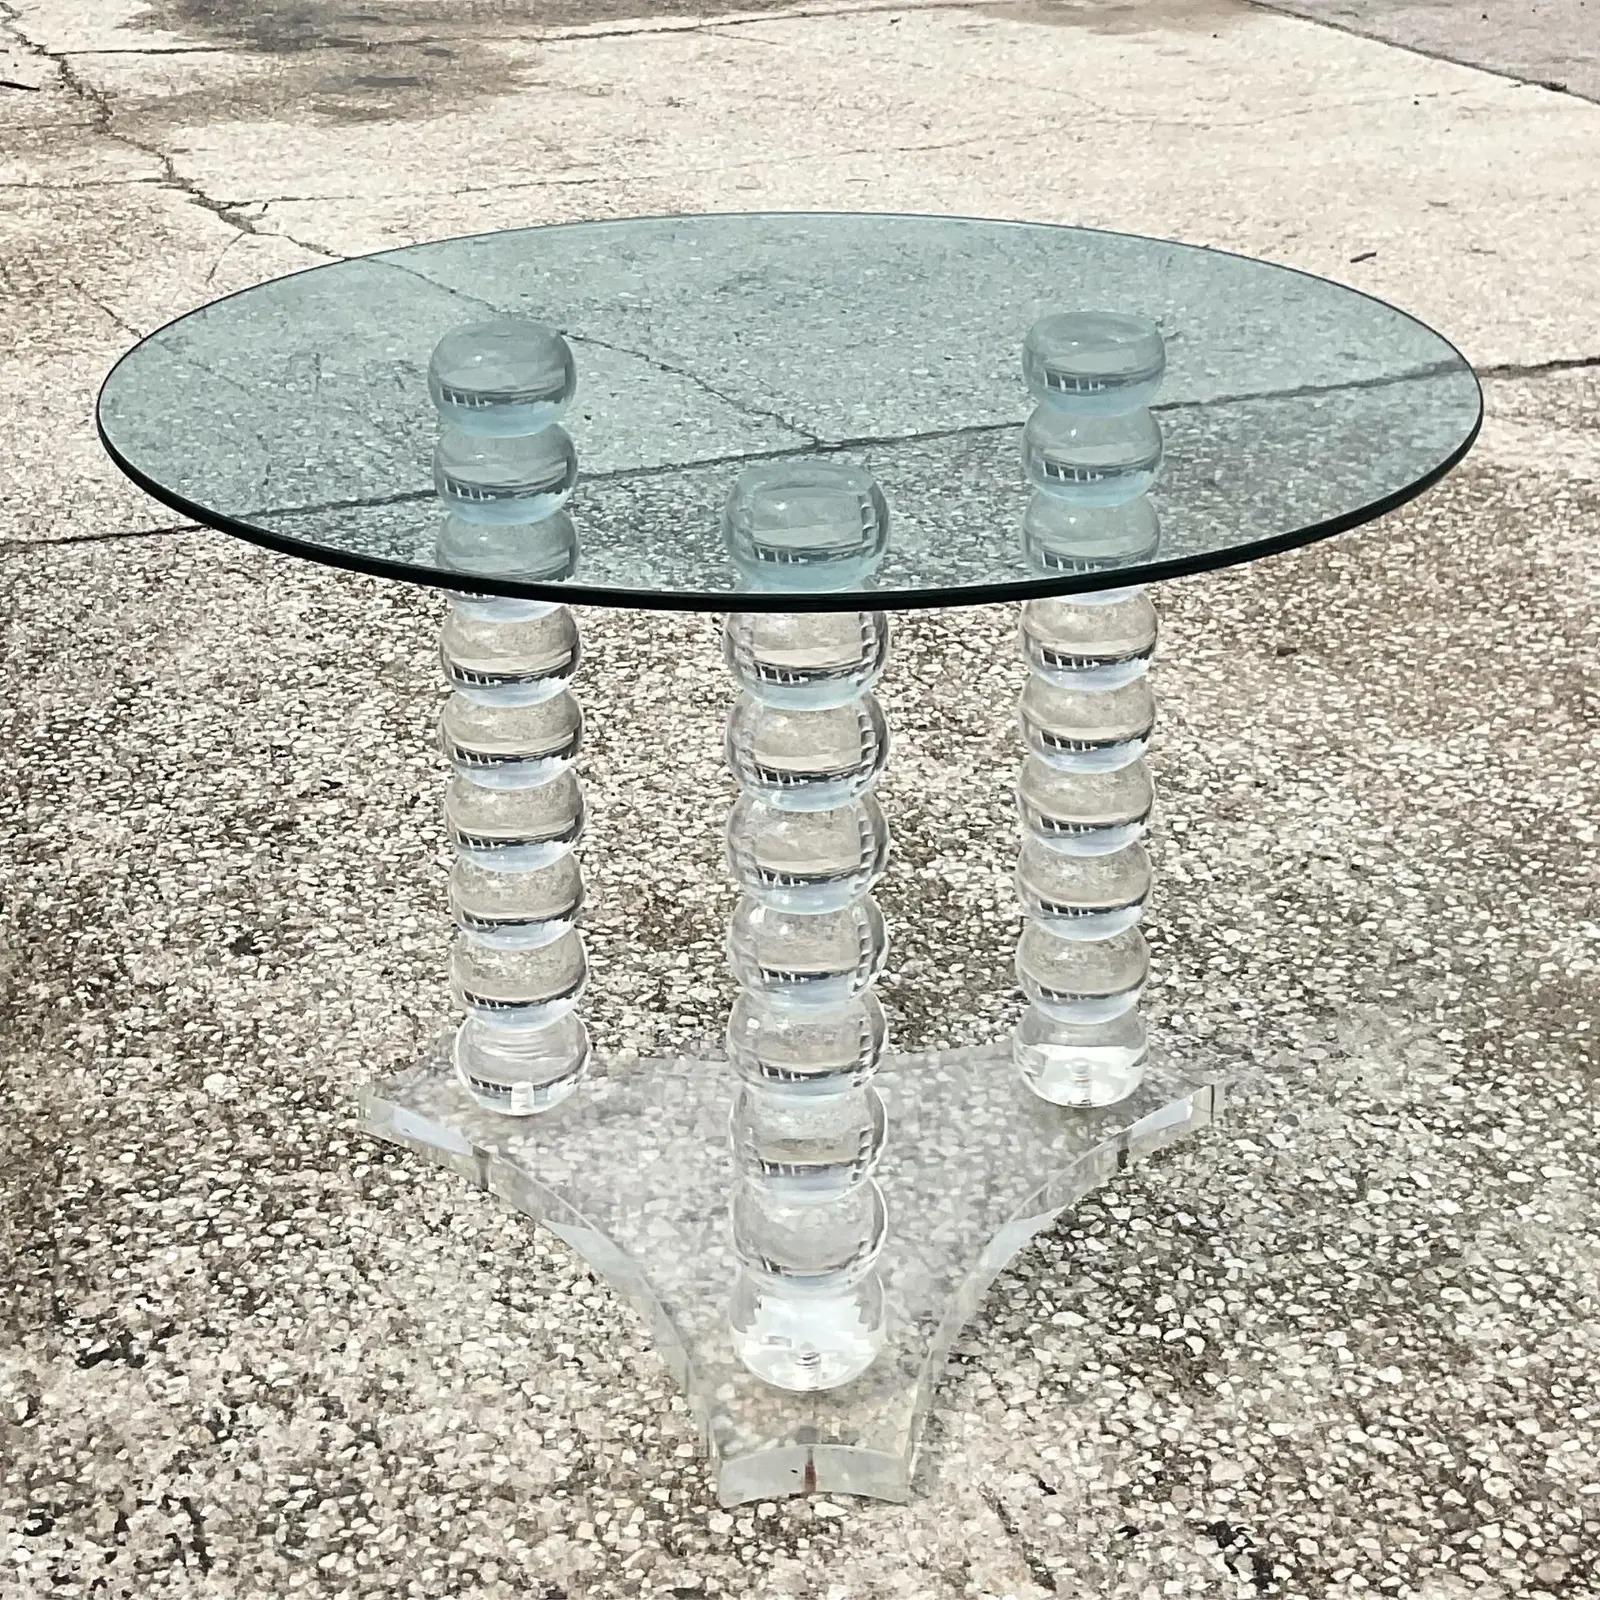 North American Vintage Contemporary Lucite Ball Bearing Pedestal Table